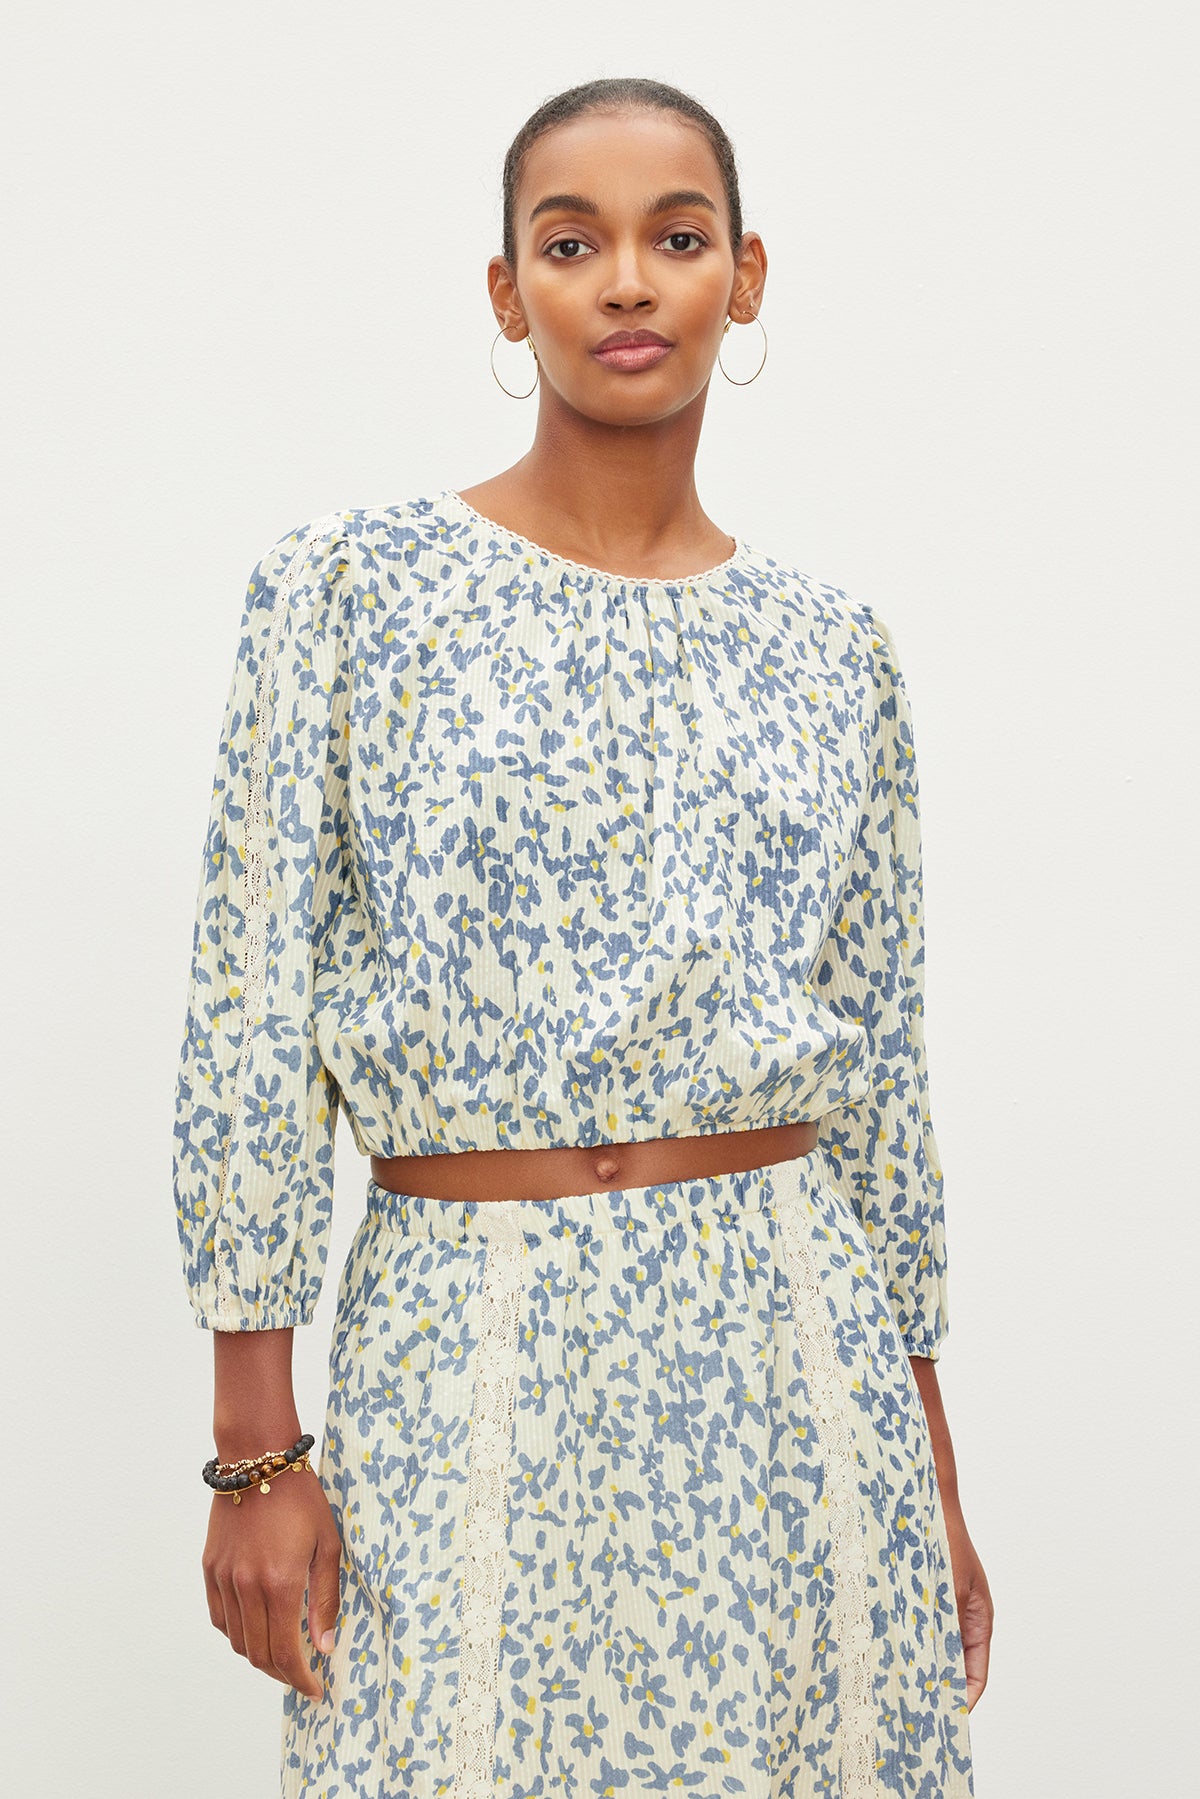   A woman stands against a plain background wearing a light-colored, floral-patterned CAMERON TOP by Velvet by Graham & Spencer with three-quarter sleeves and a matching skirt. She has short hair and is wearing hoop earrings and a bracelet. 